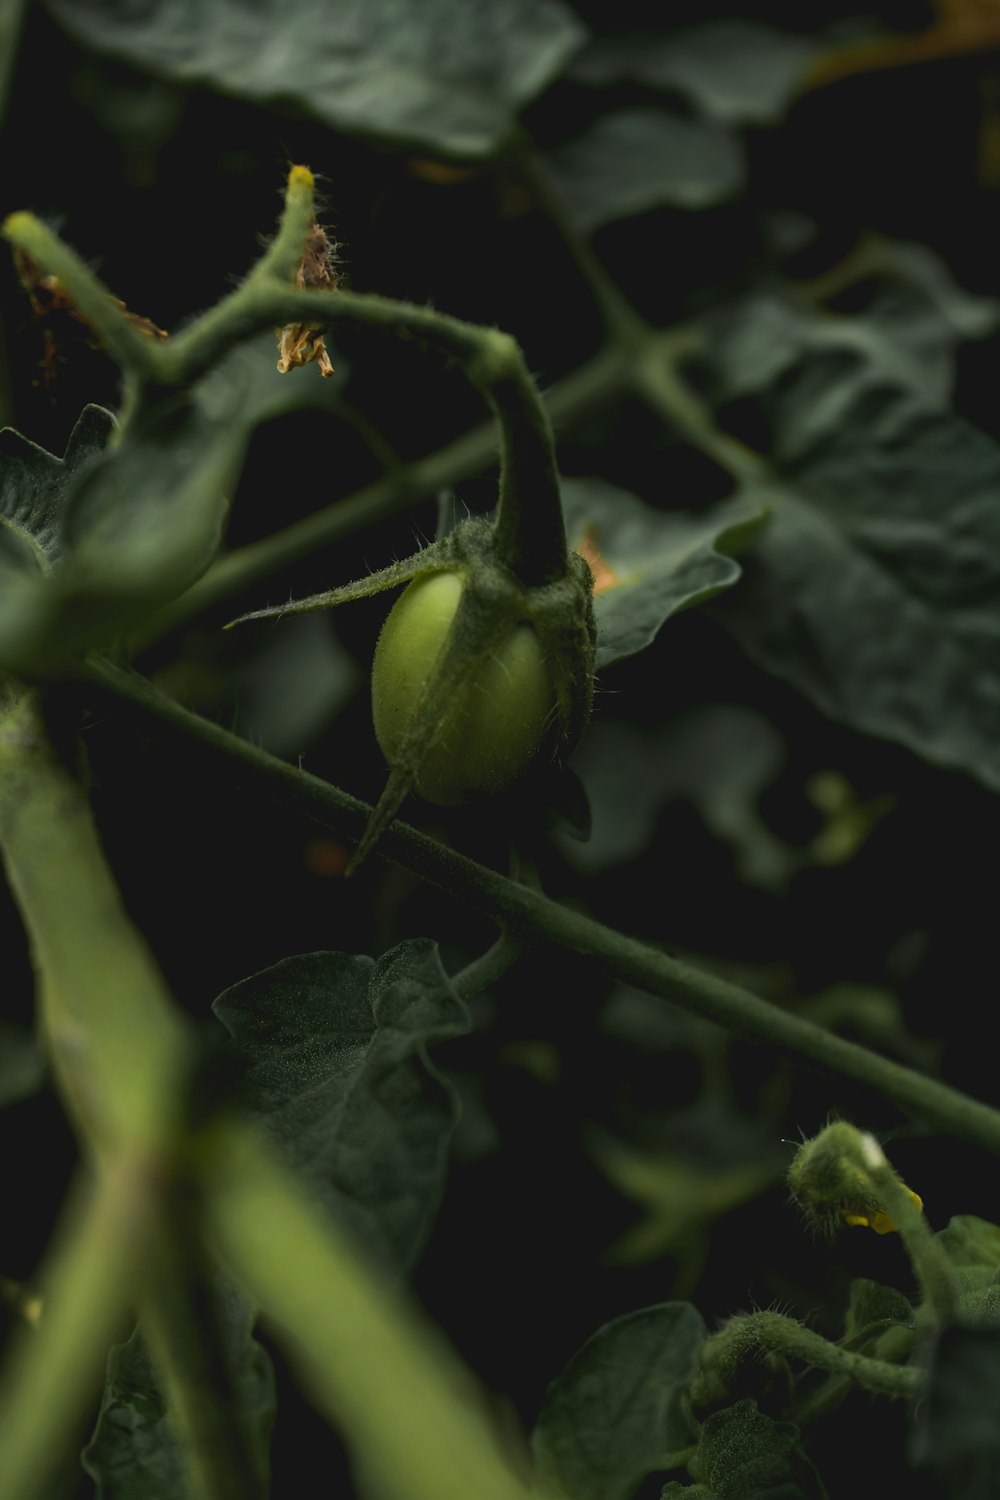 a close up of a green tomato plant